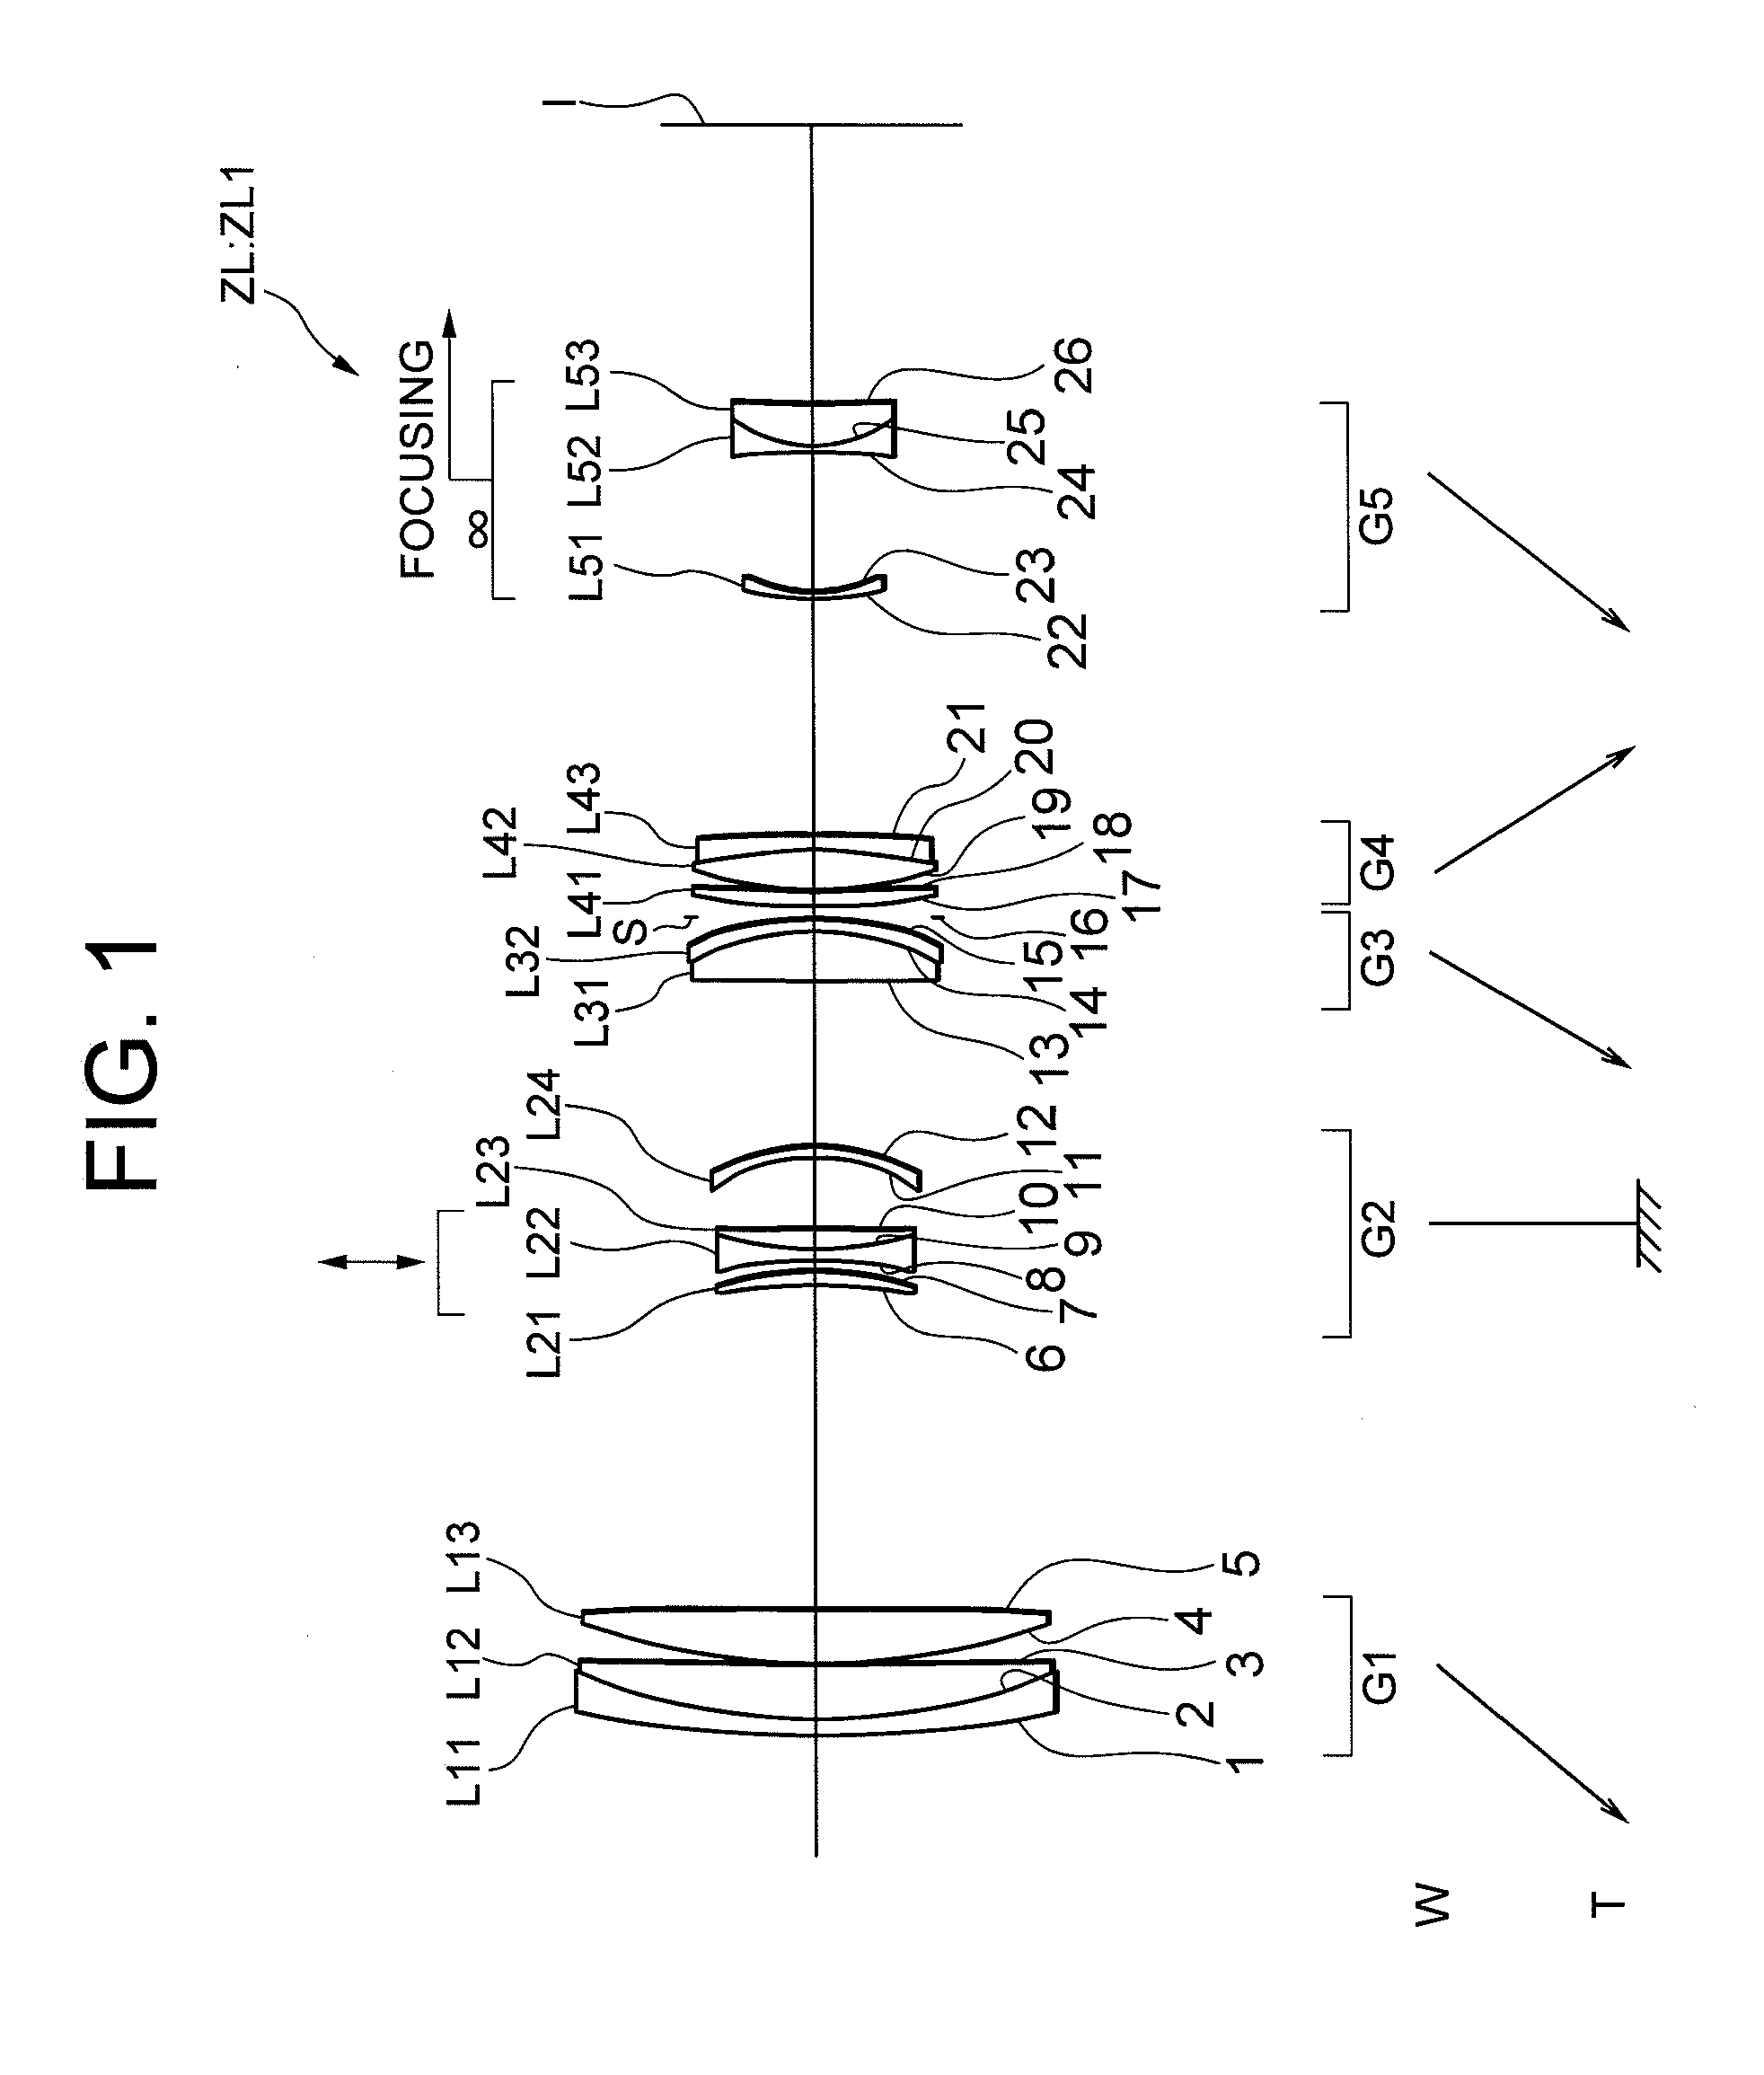 Zoom optical system, optical apparatus equipped therewith and method for manufacturing the zoom optical system